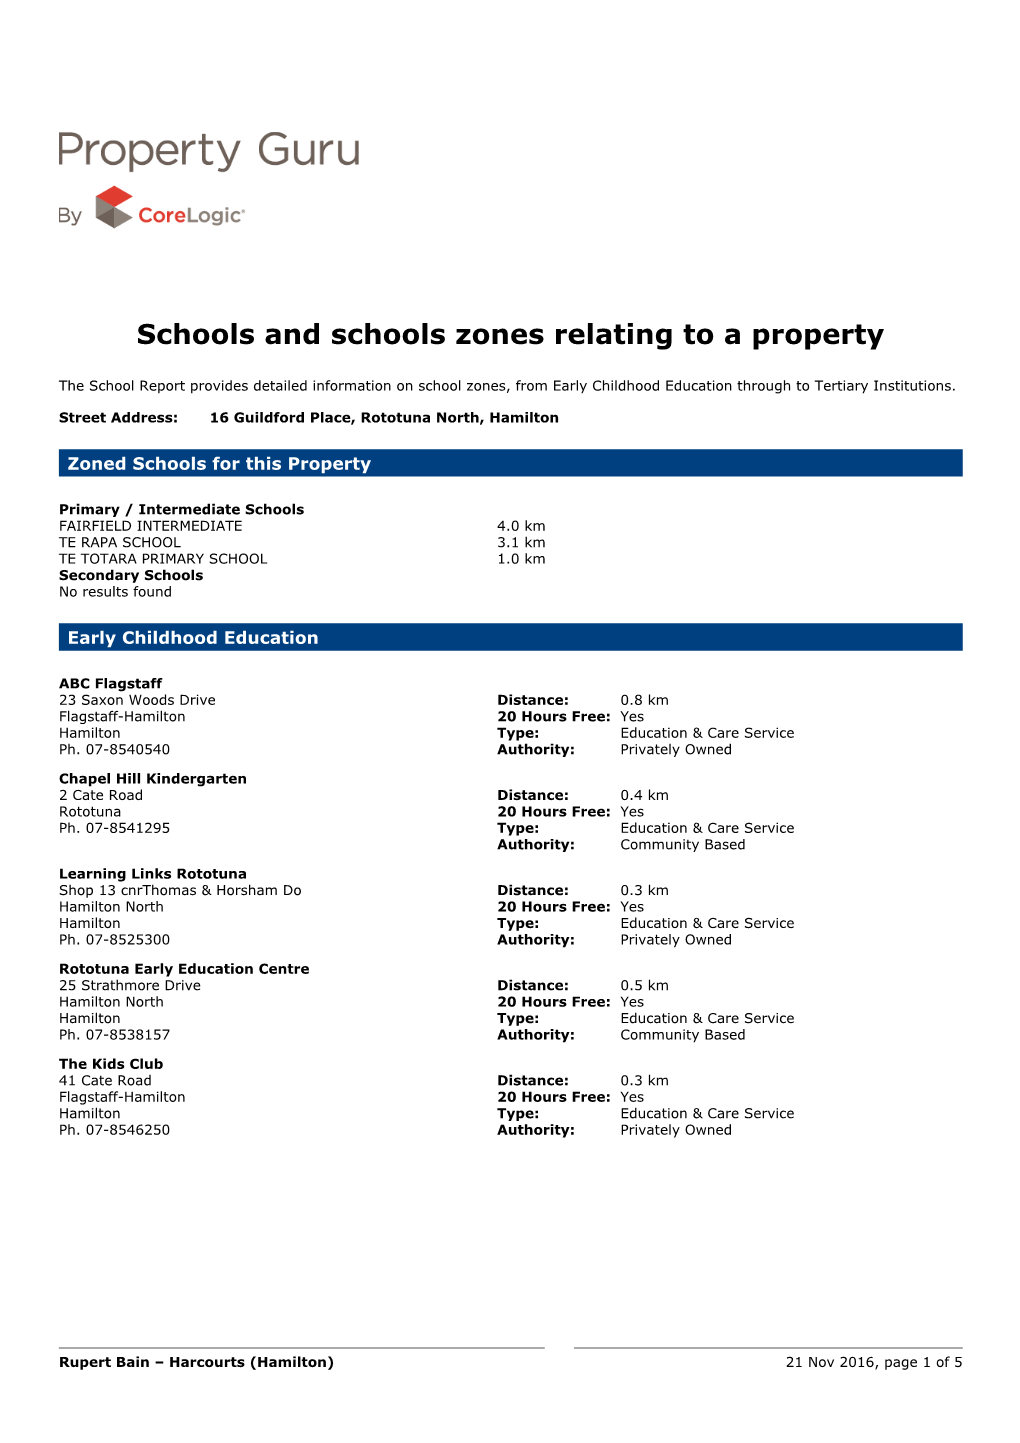 Schools and Schools Zones Relating to a Property